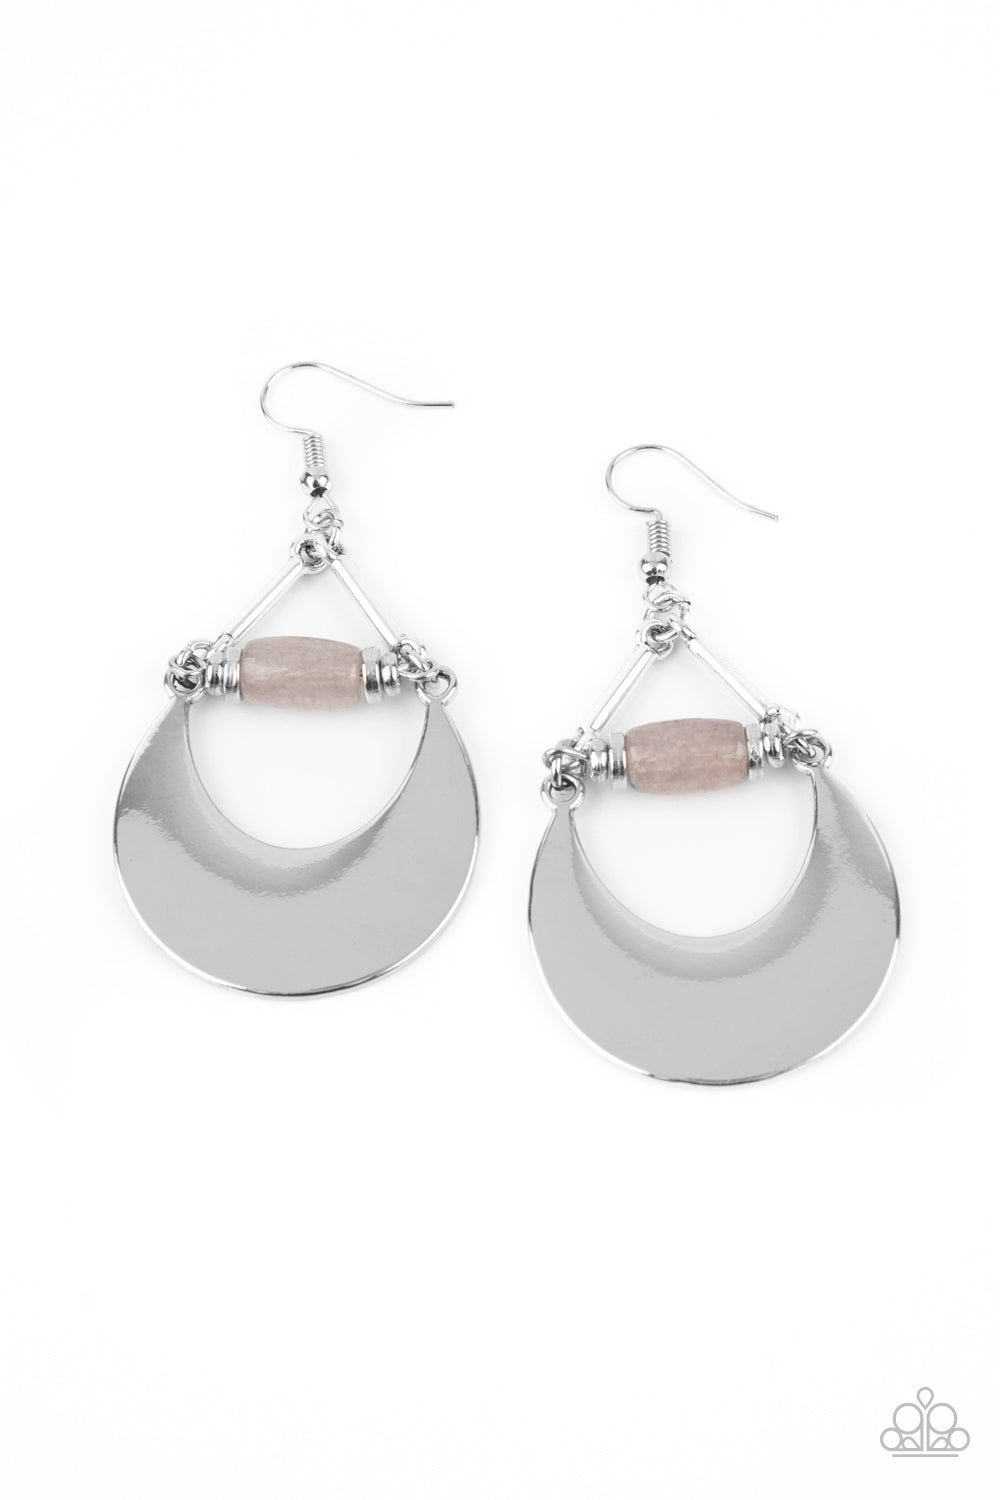 Mystical Moonbeams - Silver - Earrings - Paparazzi Accessories